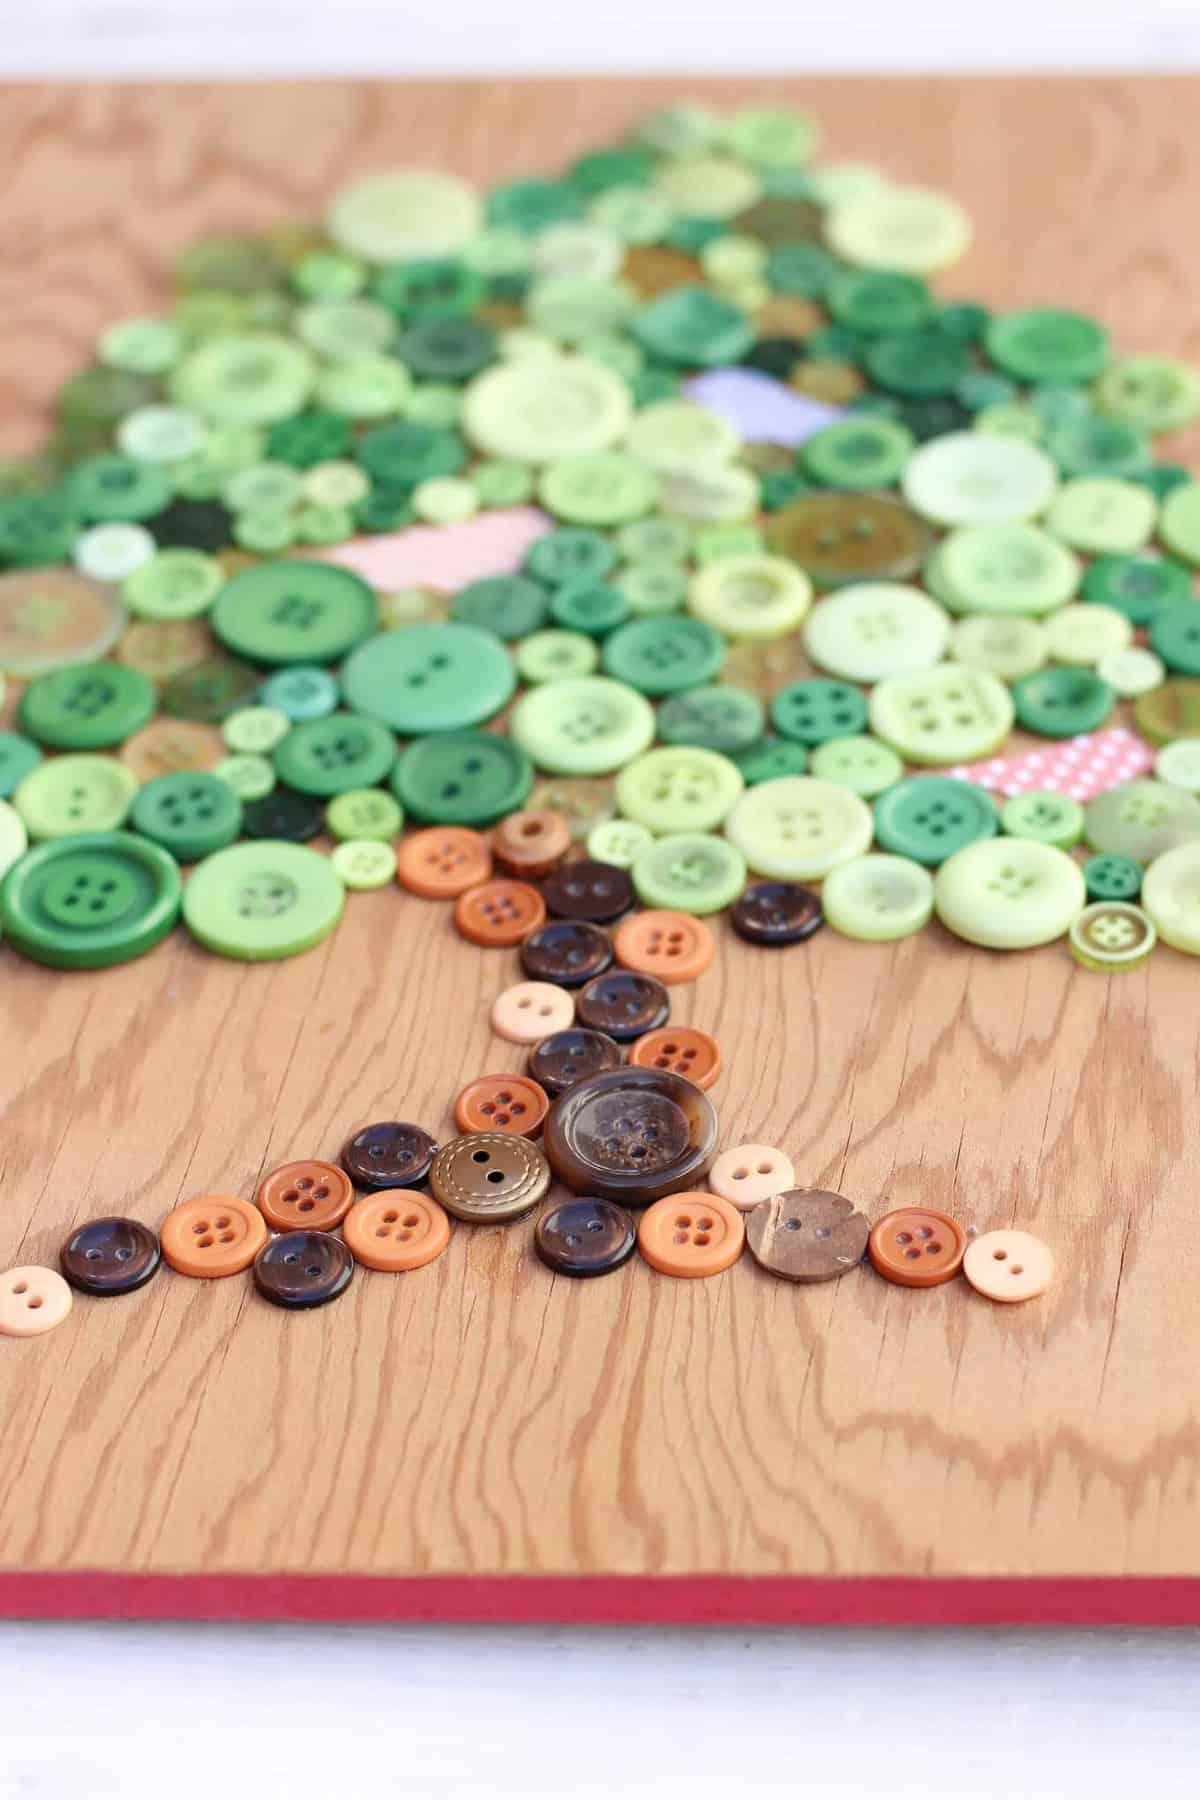 This DIY button art project makes a great Earth Day craft idea. It also looks sweet in a baby's room or nursery, especially as part of a gallery wall. Free printable template to make your own. Click for the full tutorial. | MakeAndDoCrew.com